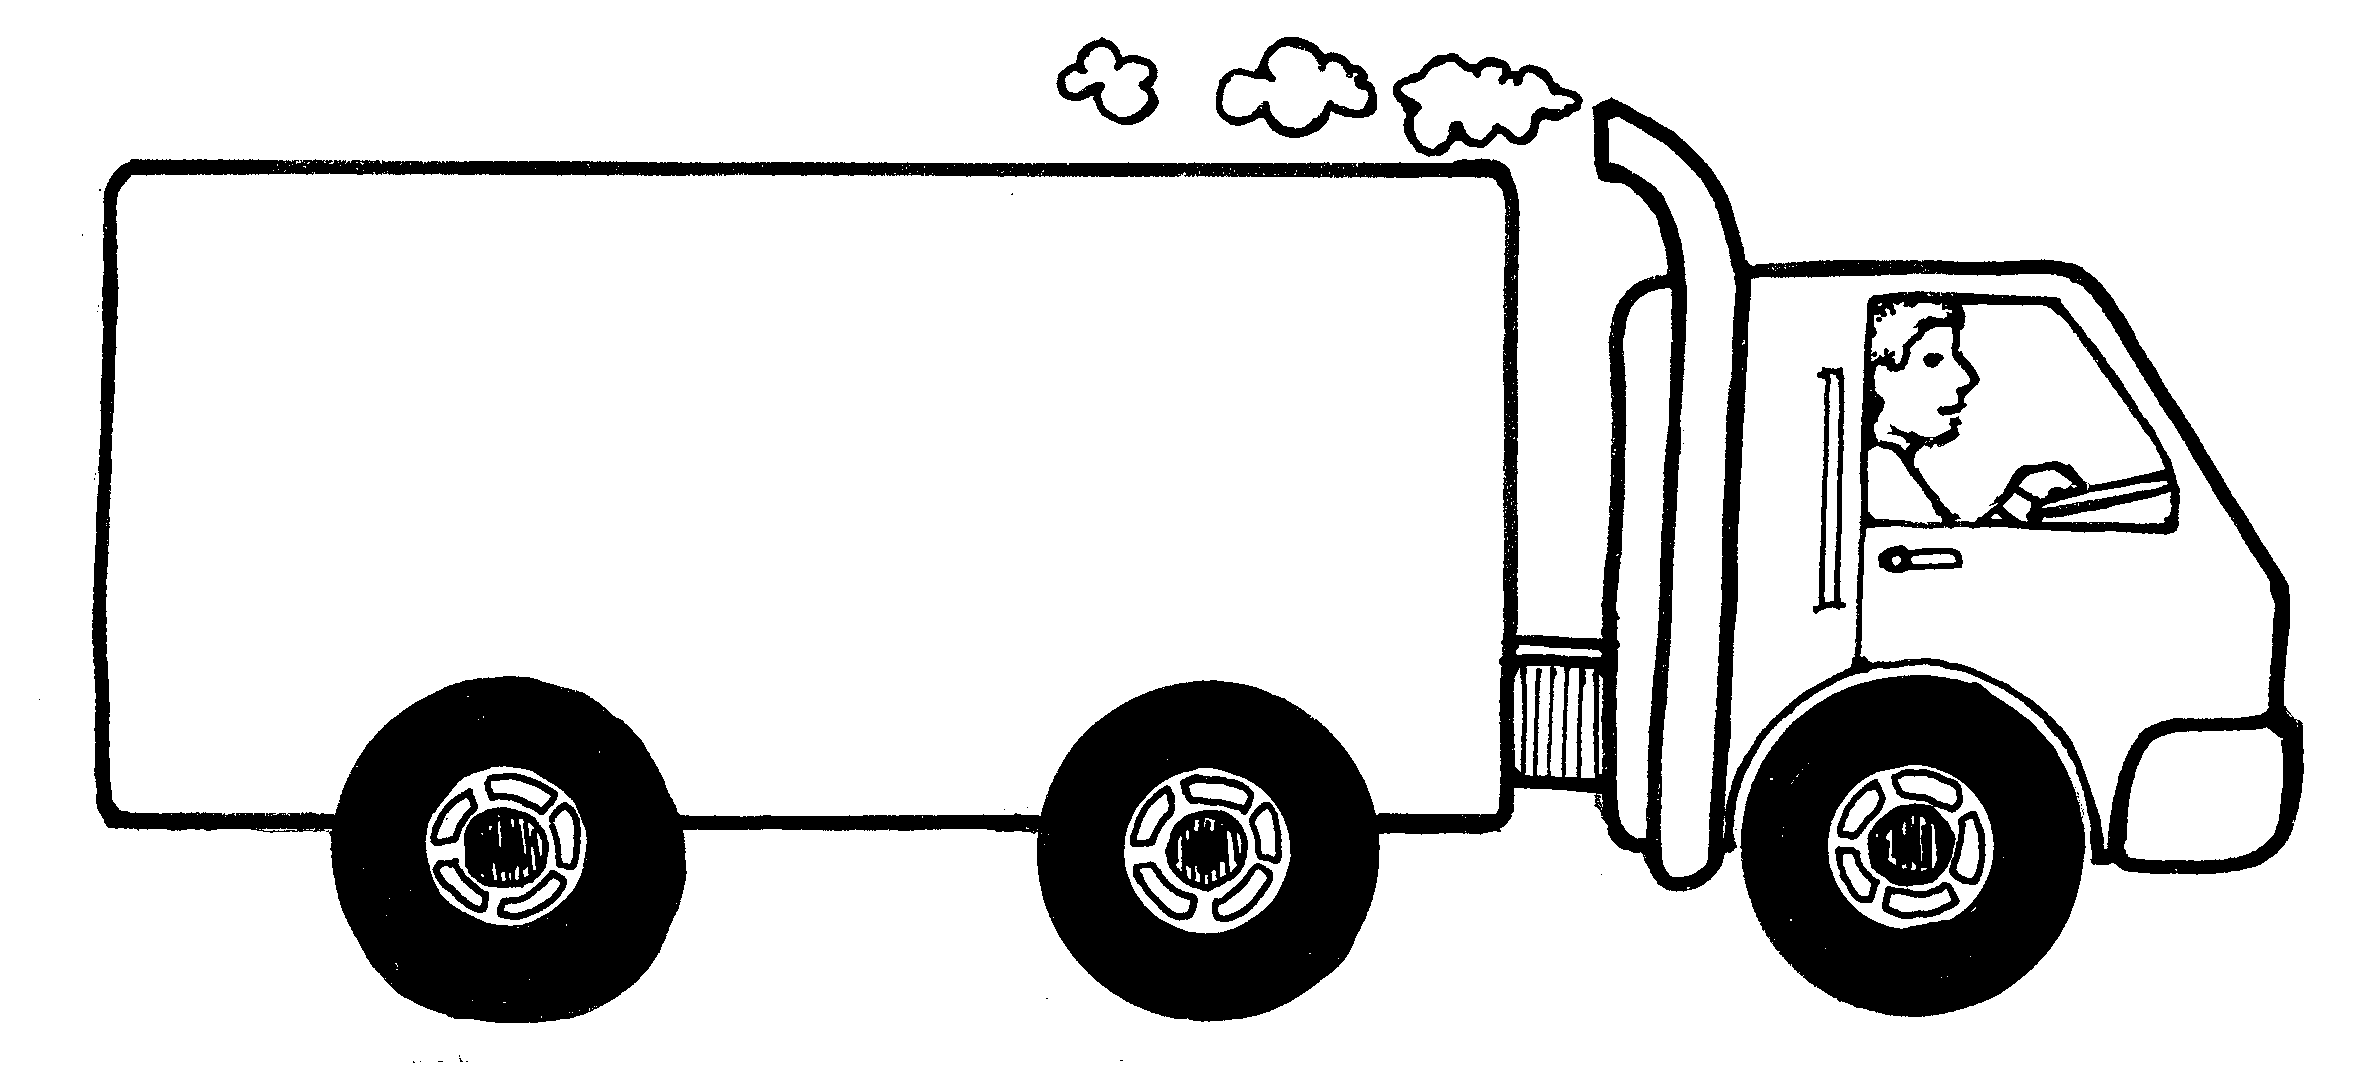 Truck  black and white dump truck clipart black and white free